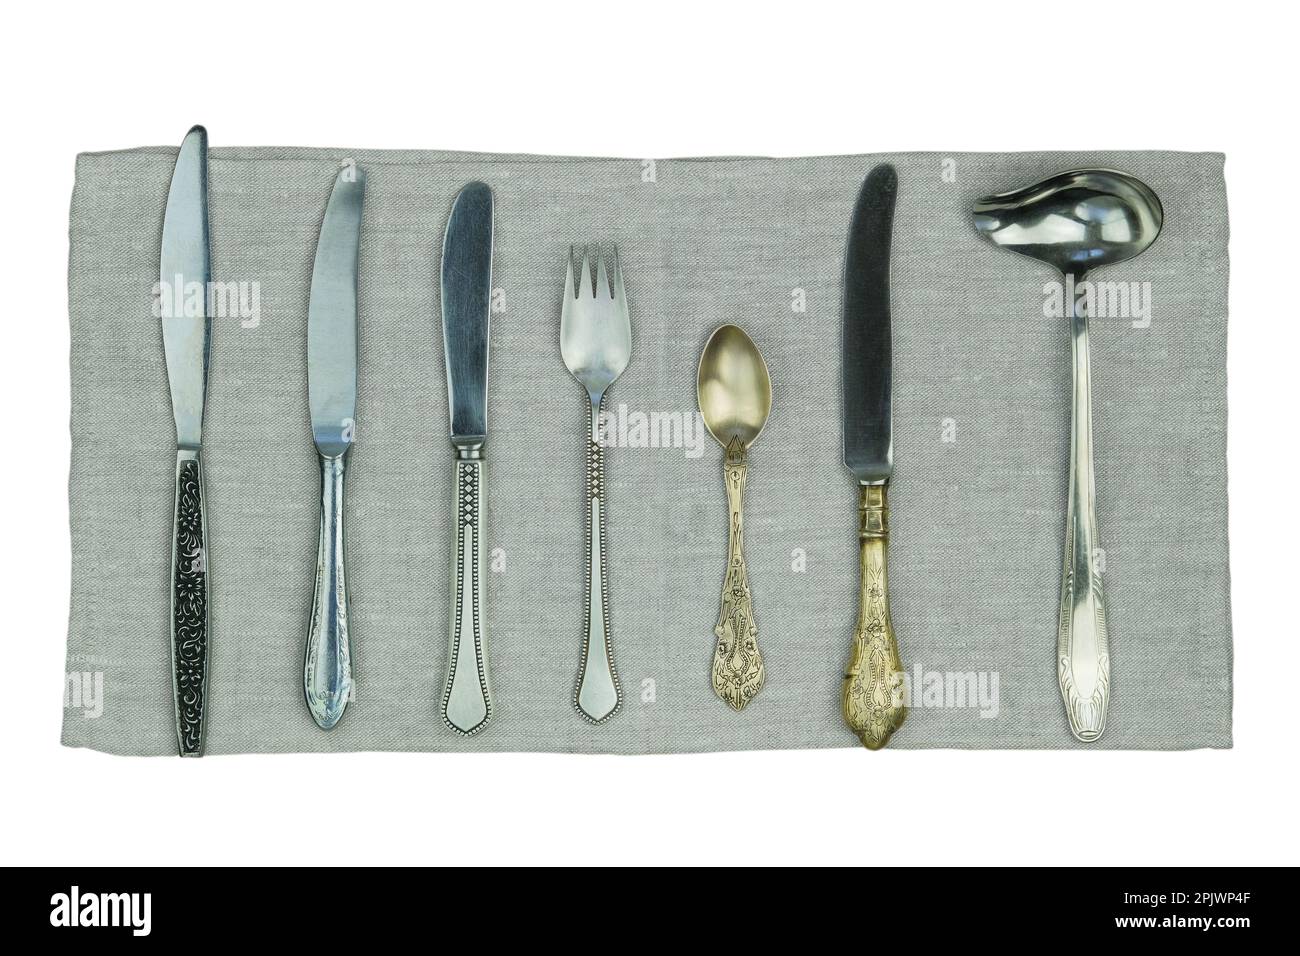 Variety of knives, forks and other kitchen utensils on a linen napkin isolated on a white background. Top view. Stock Photo